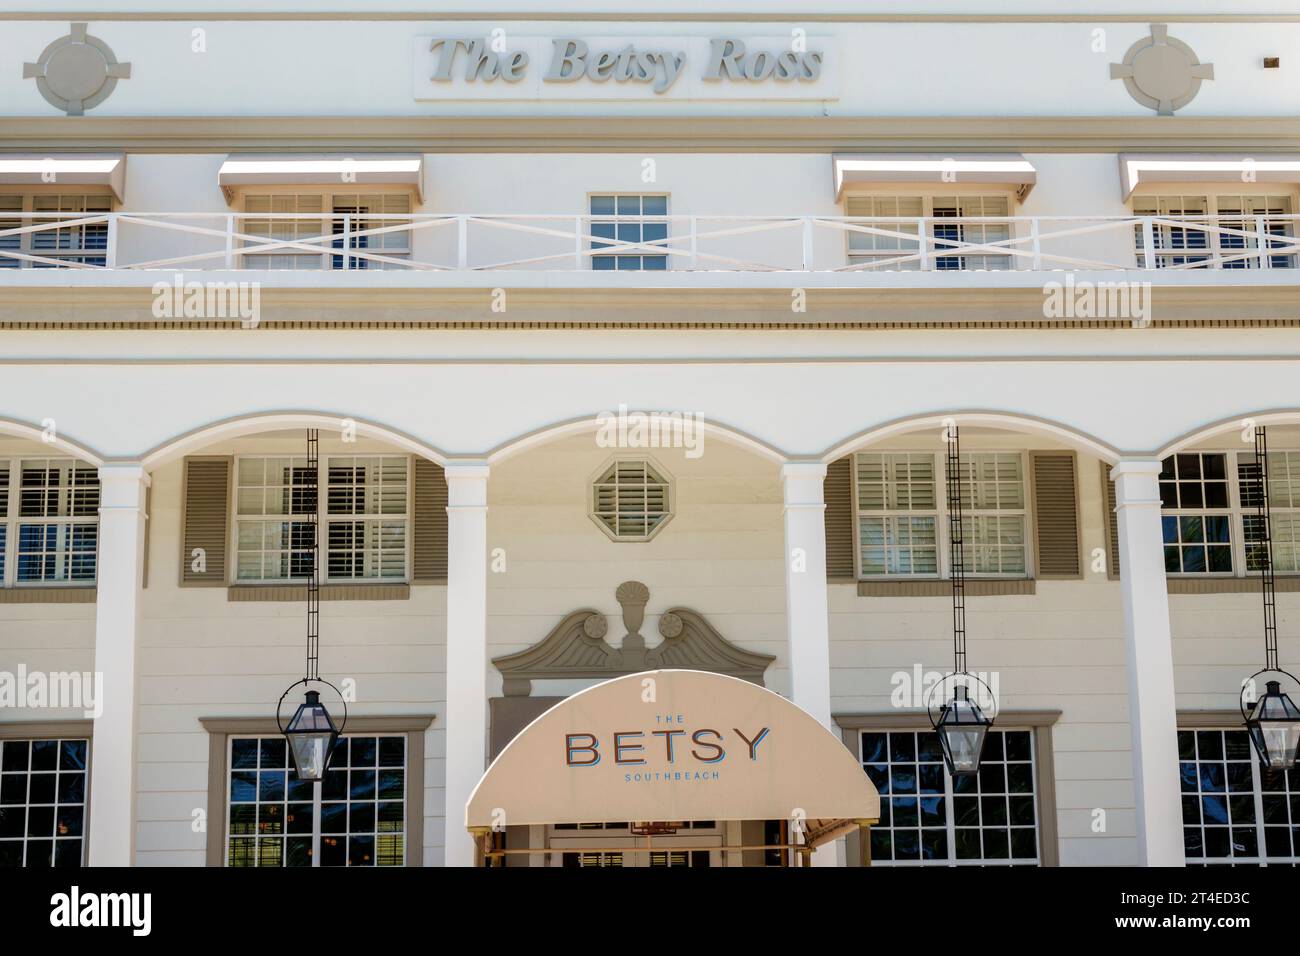 Miami Beach Florida,outside exterior,building front entrance hotel,Ocean Drive The Betsy South Beach sign awning,hotels motels businesses Stock Photo